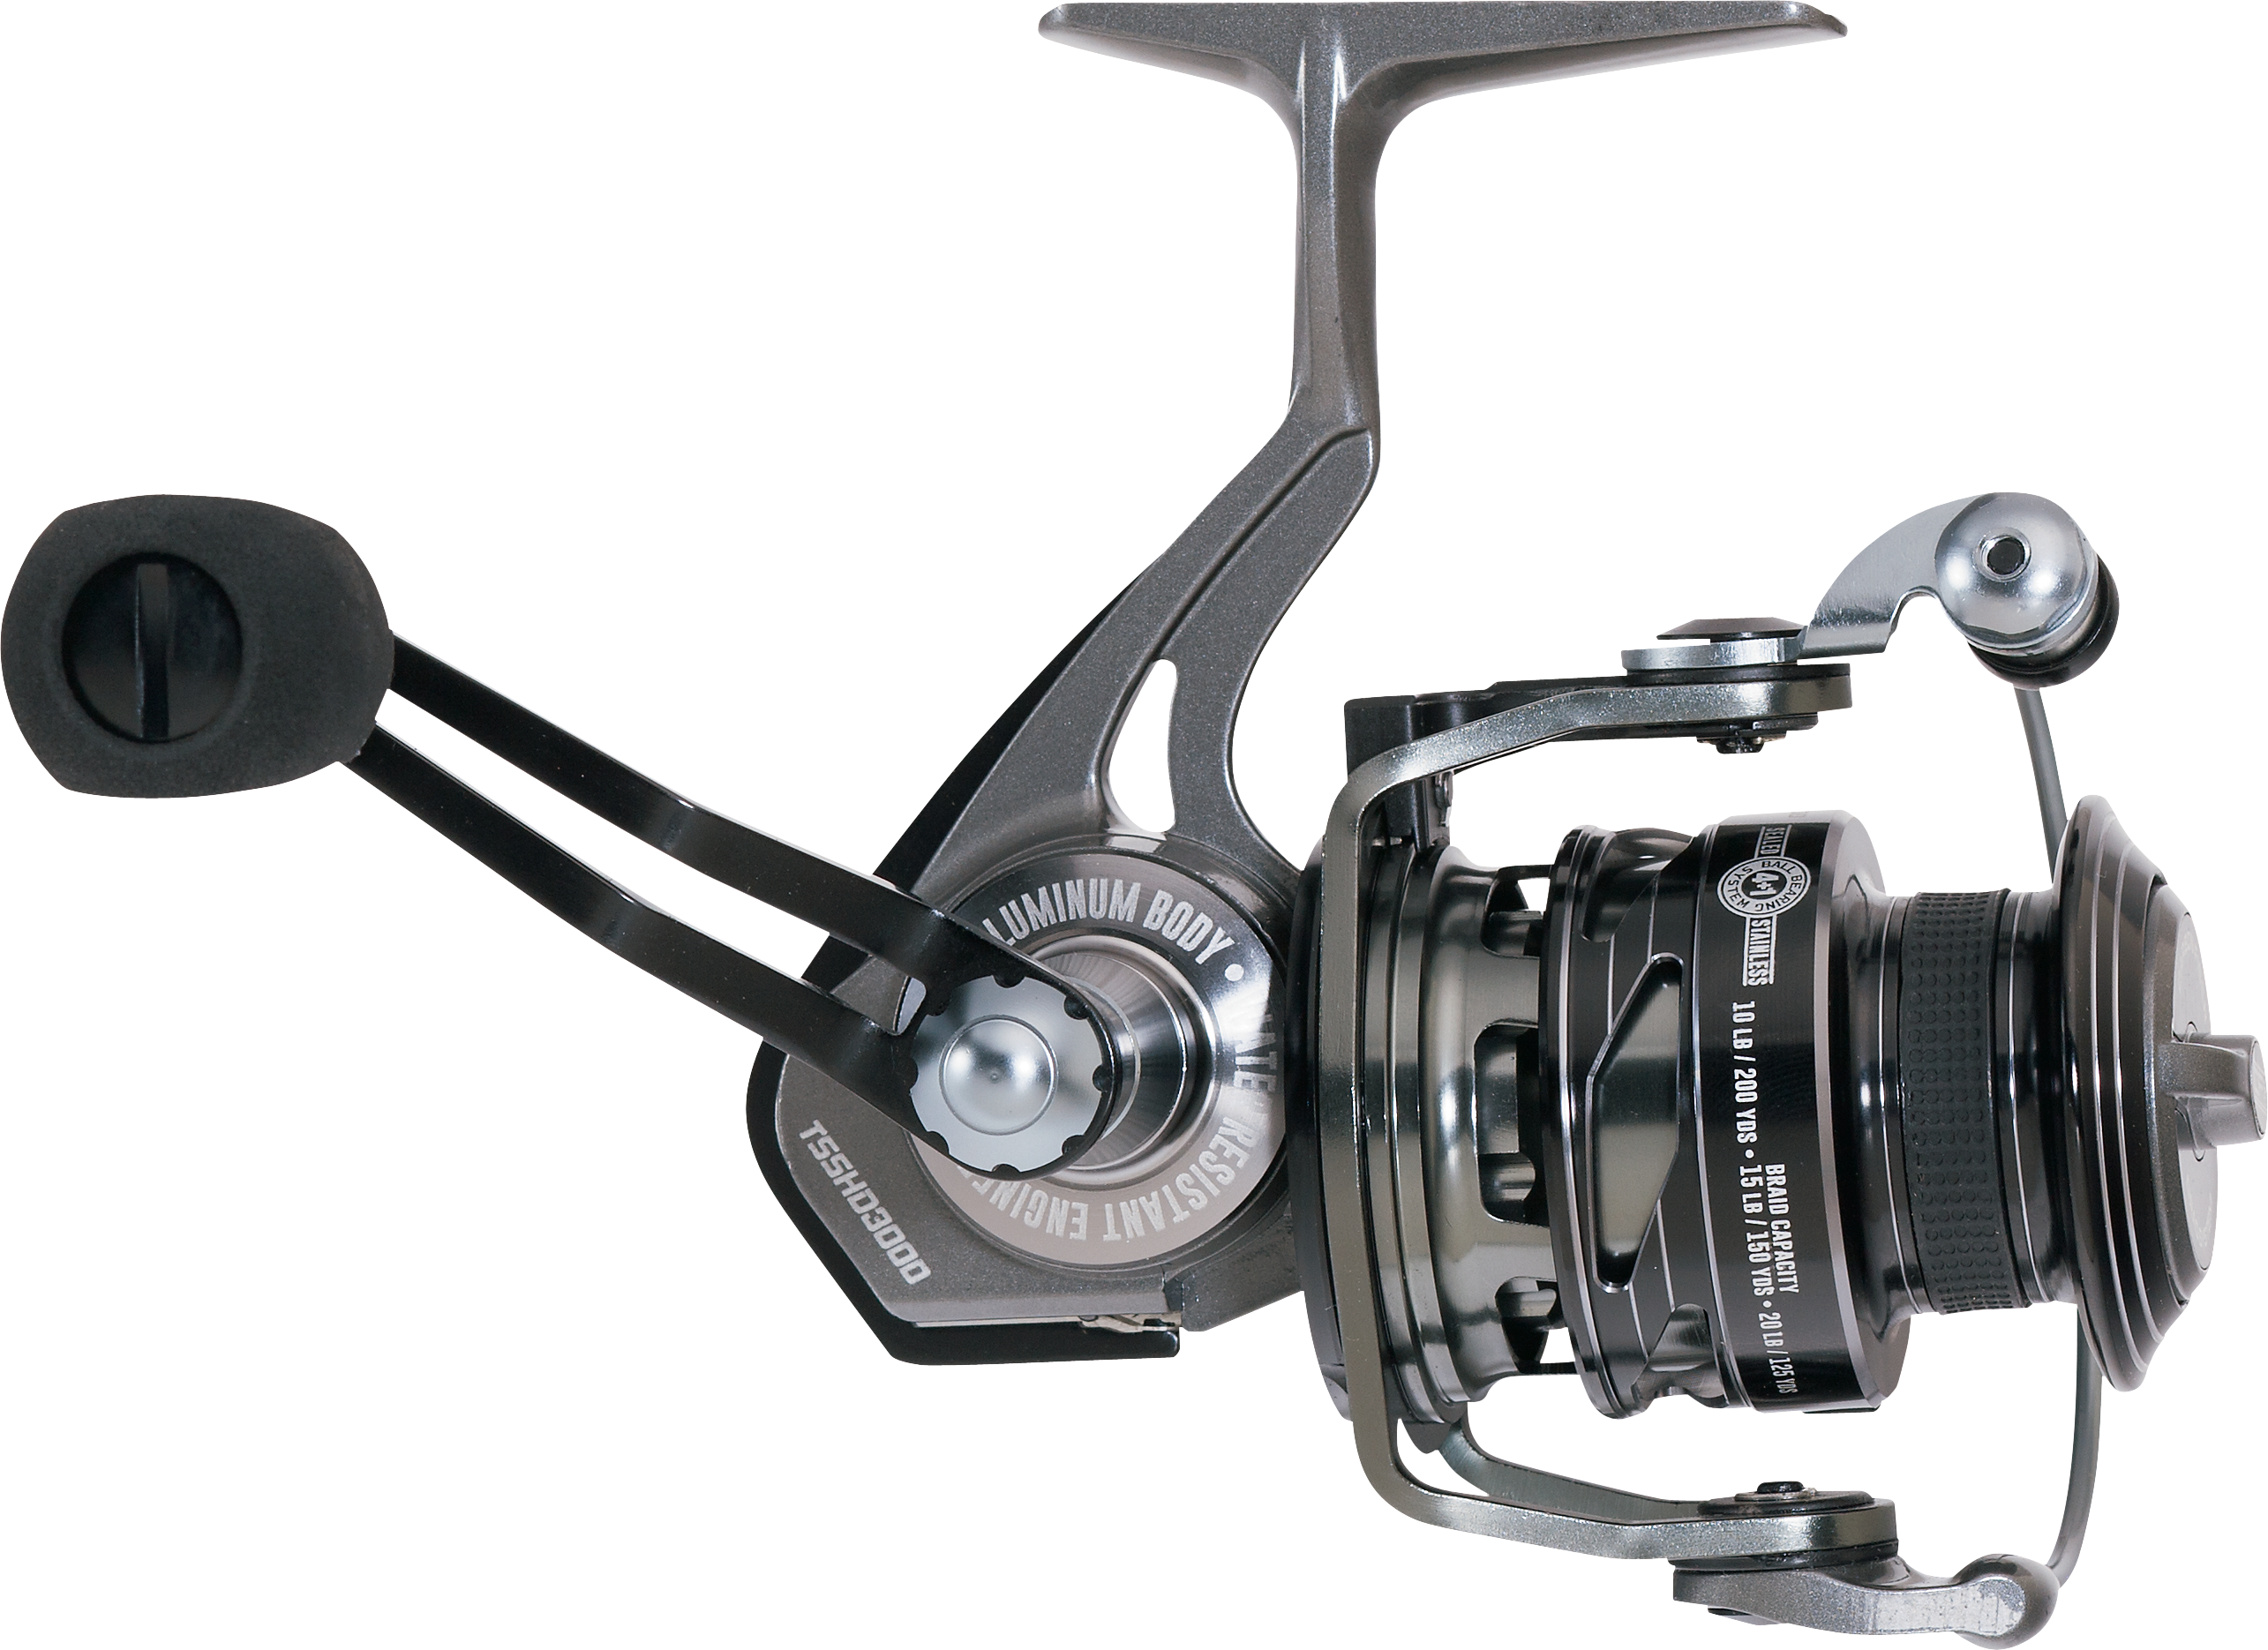 Buy Budget Friendly Spinning Reels